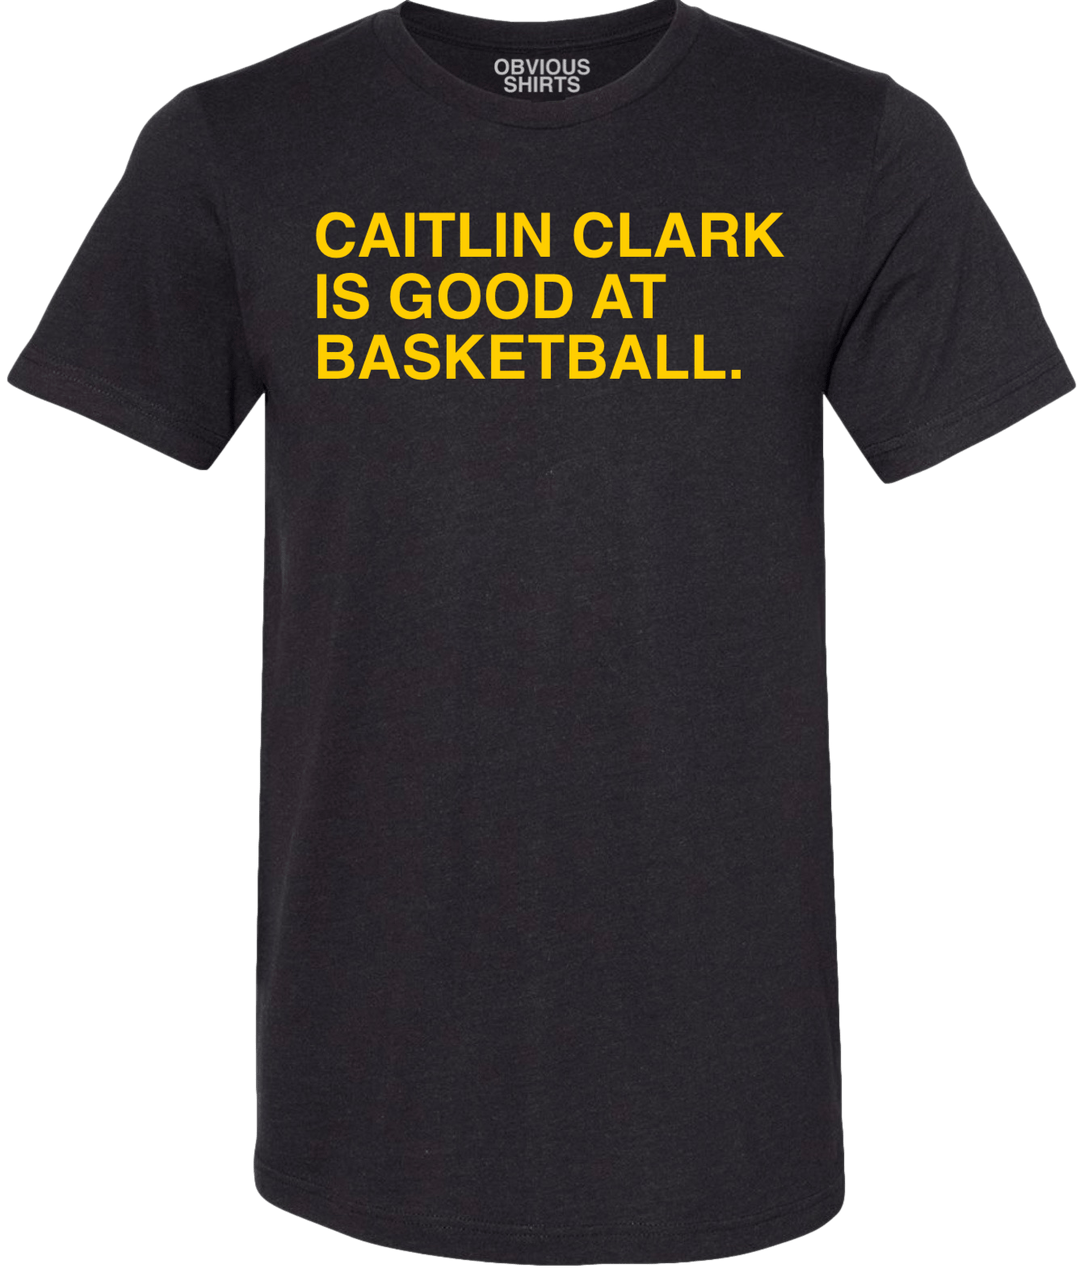 CAITLIN CLARK IS GOOD AT BASKETBALL. - OBVIOUS SHIRTS